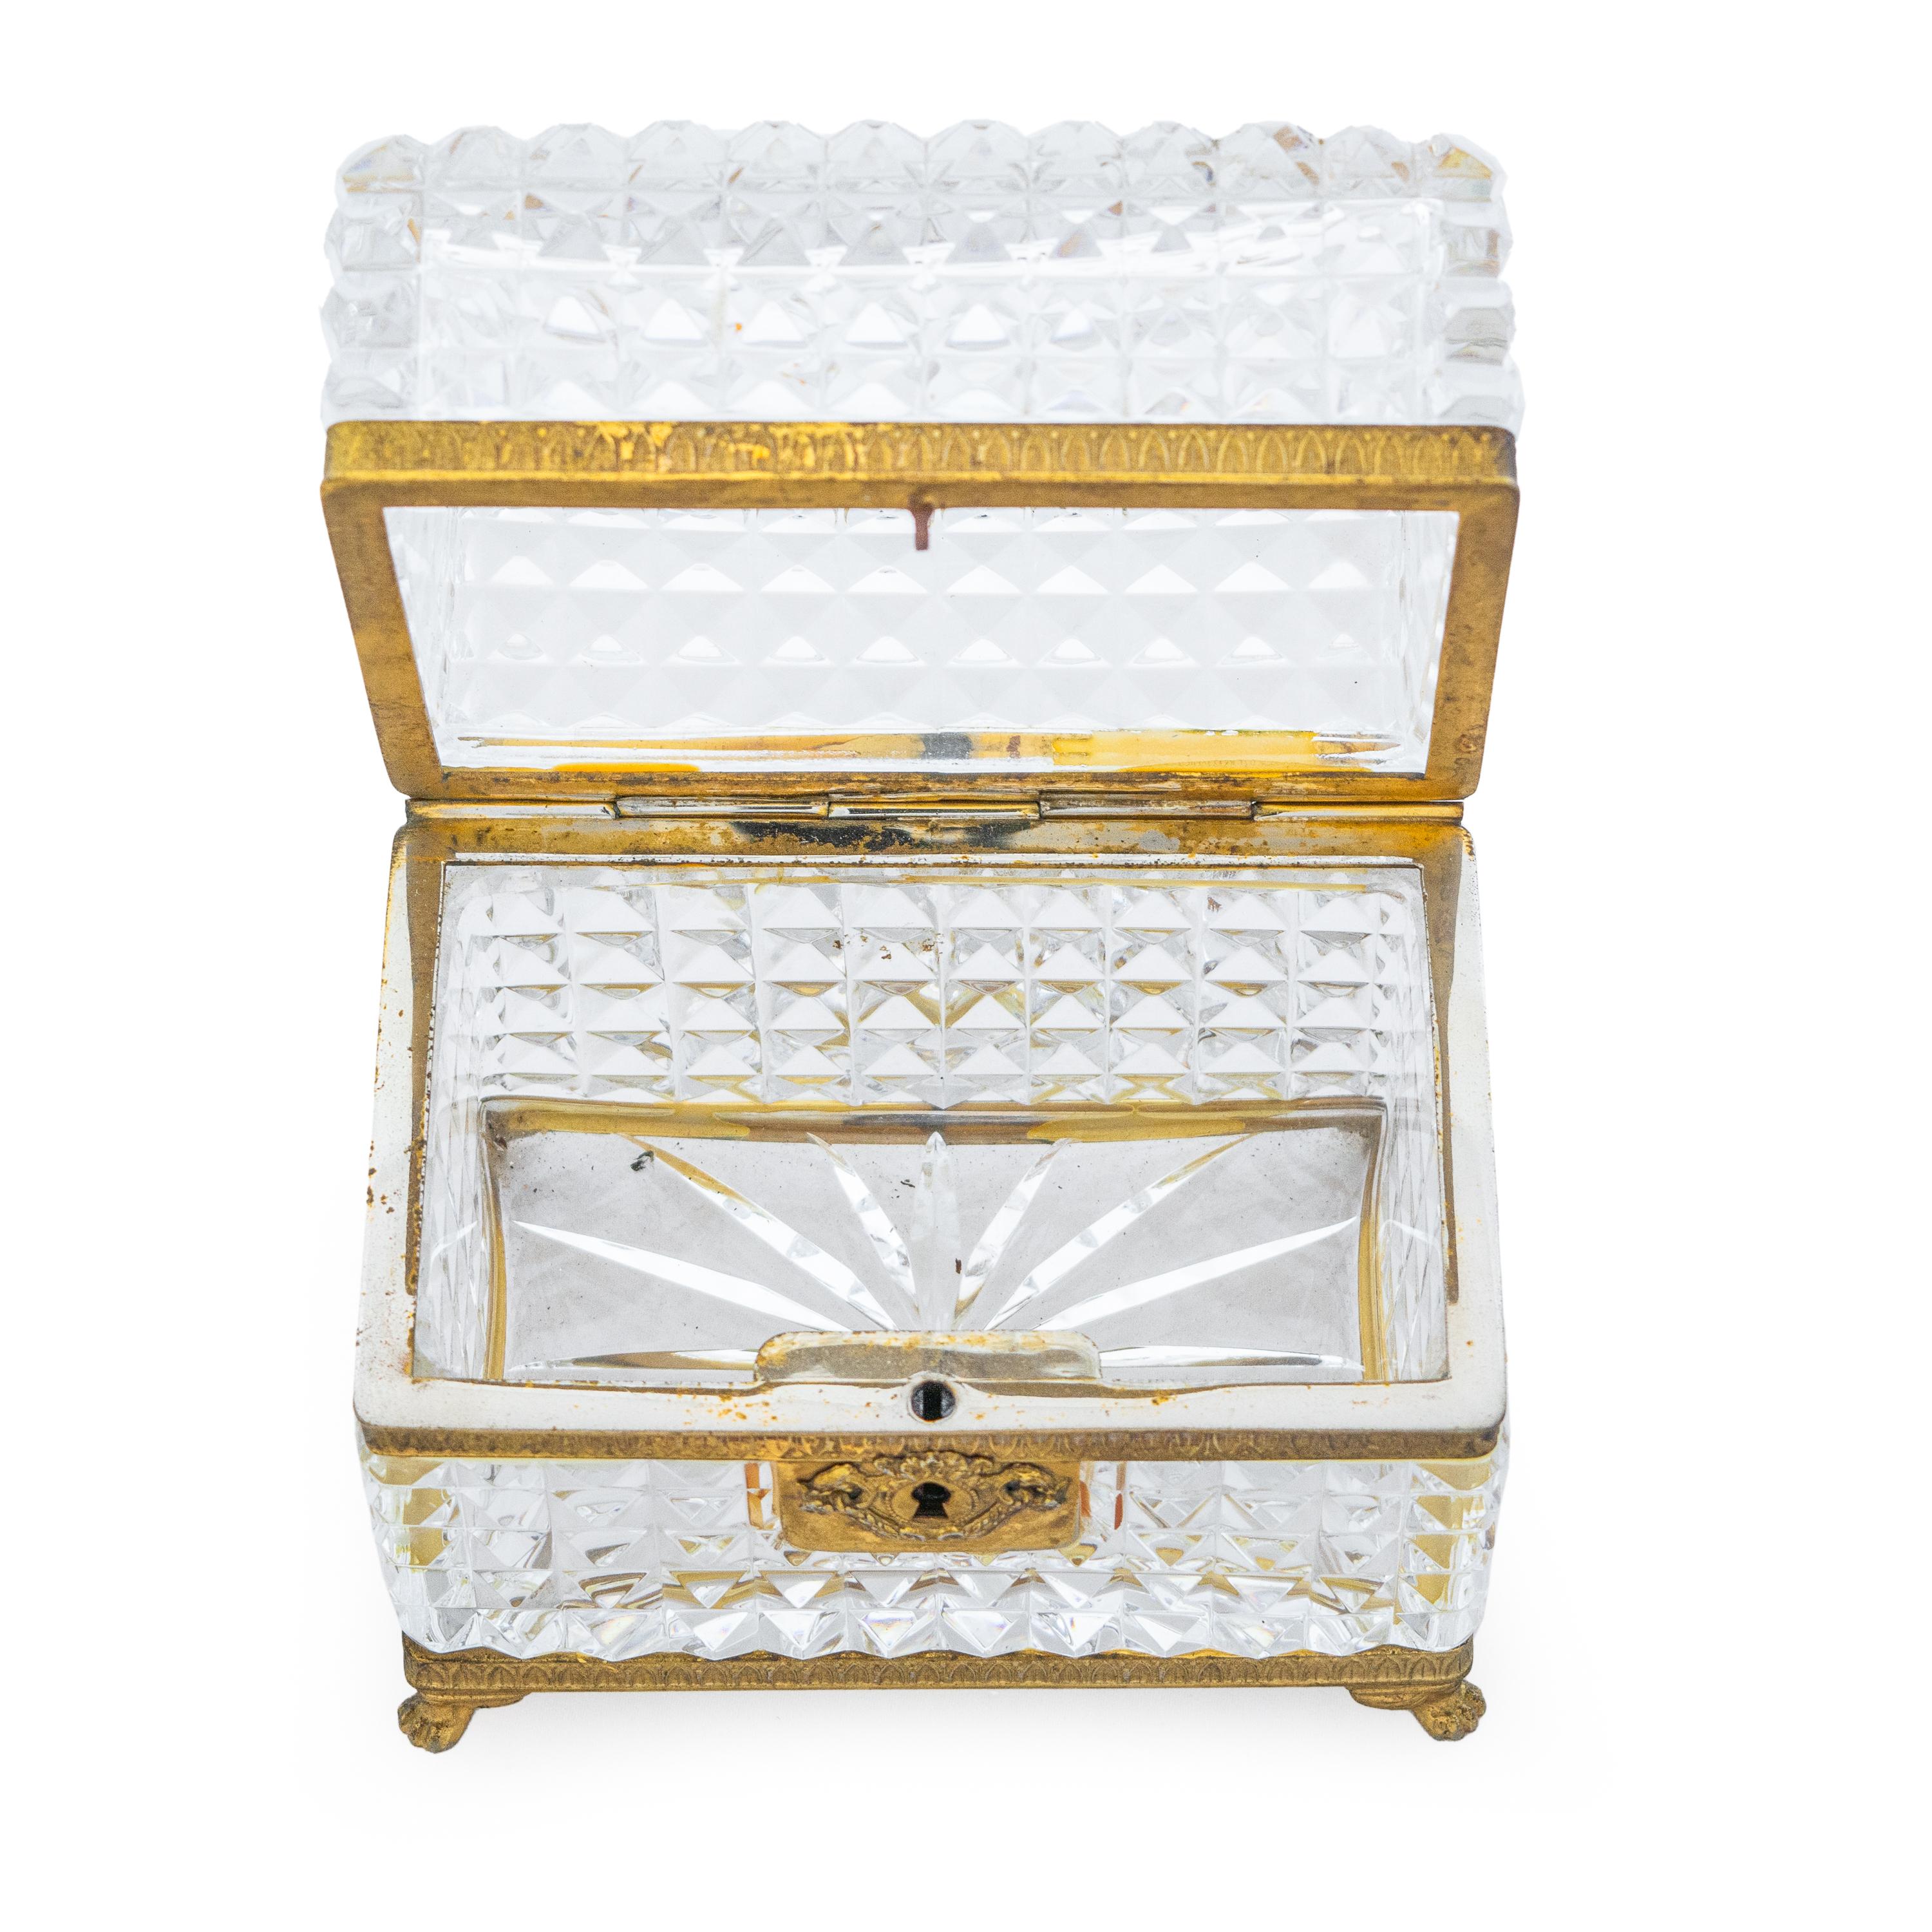 This is a Classic French Baccarat style cut glass box with brass trim and hinged lid, supported by small splayed feet, 19th century.